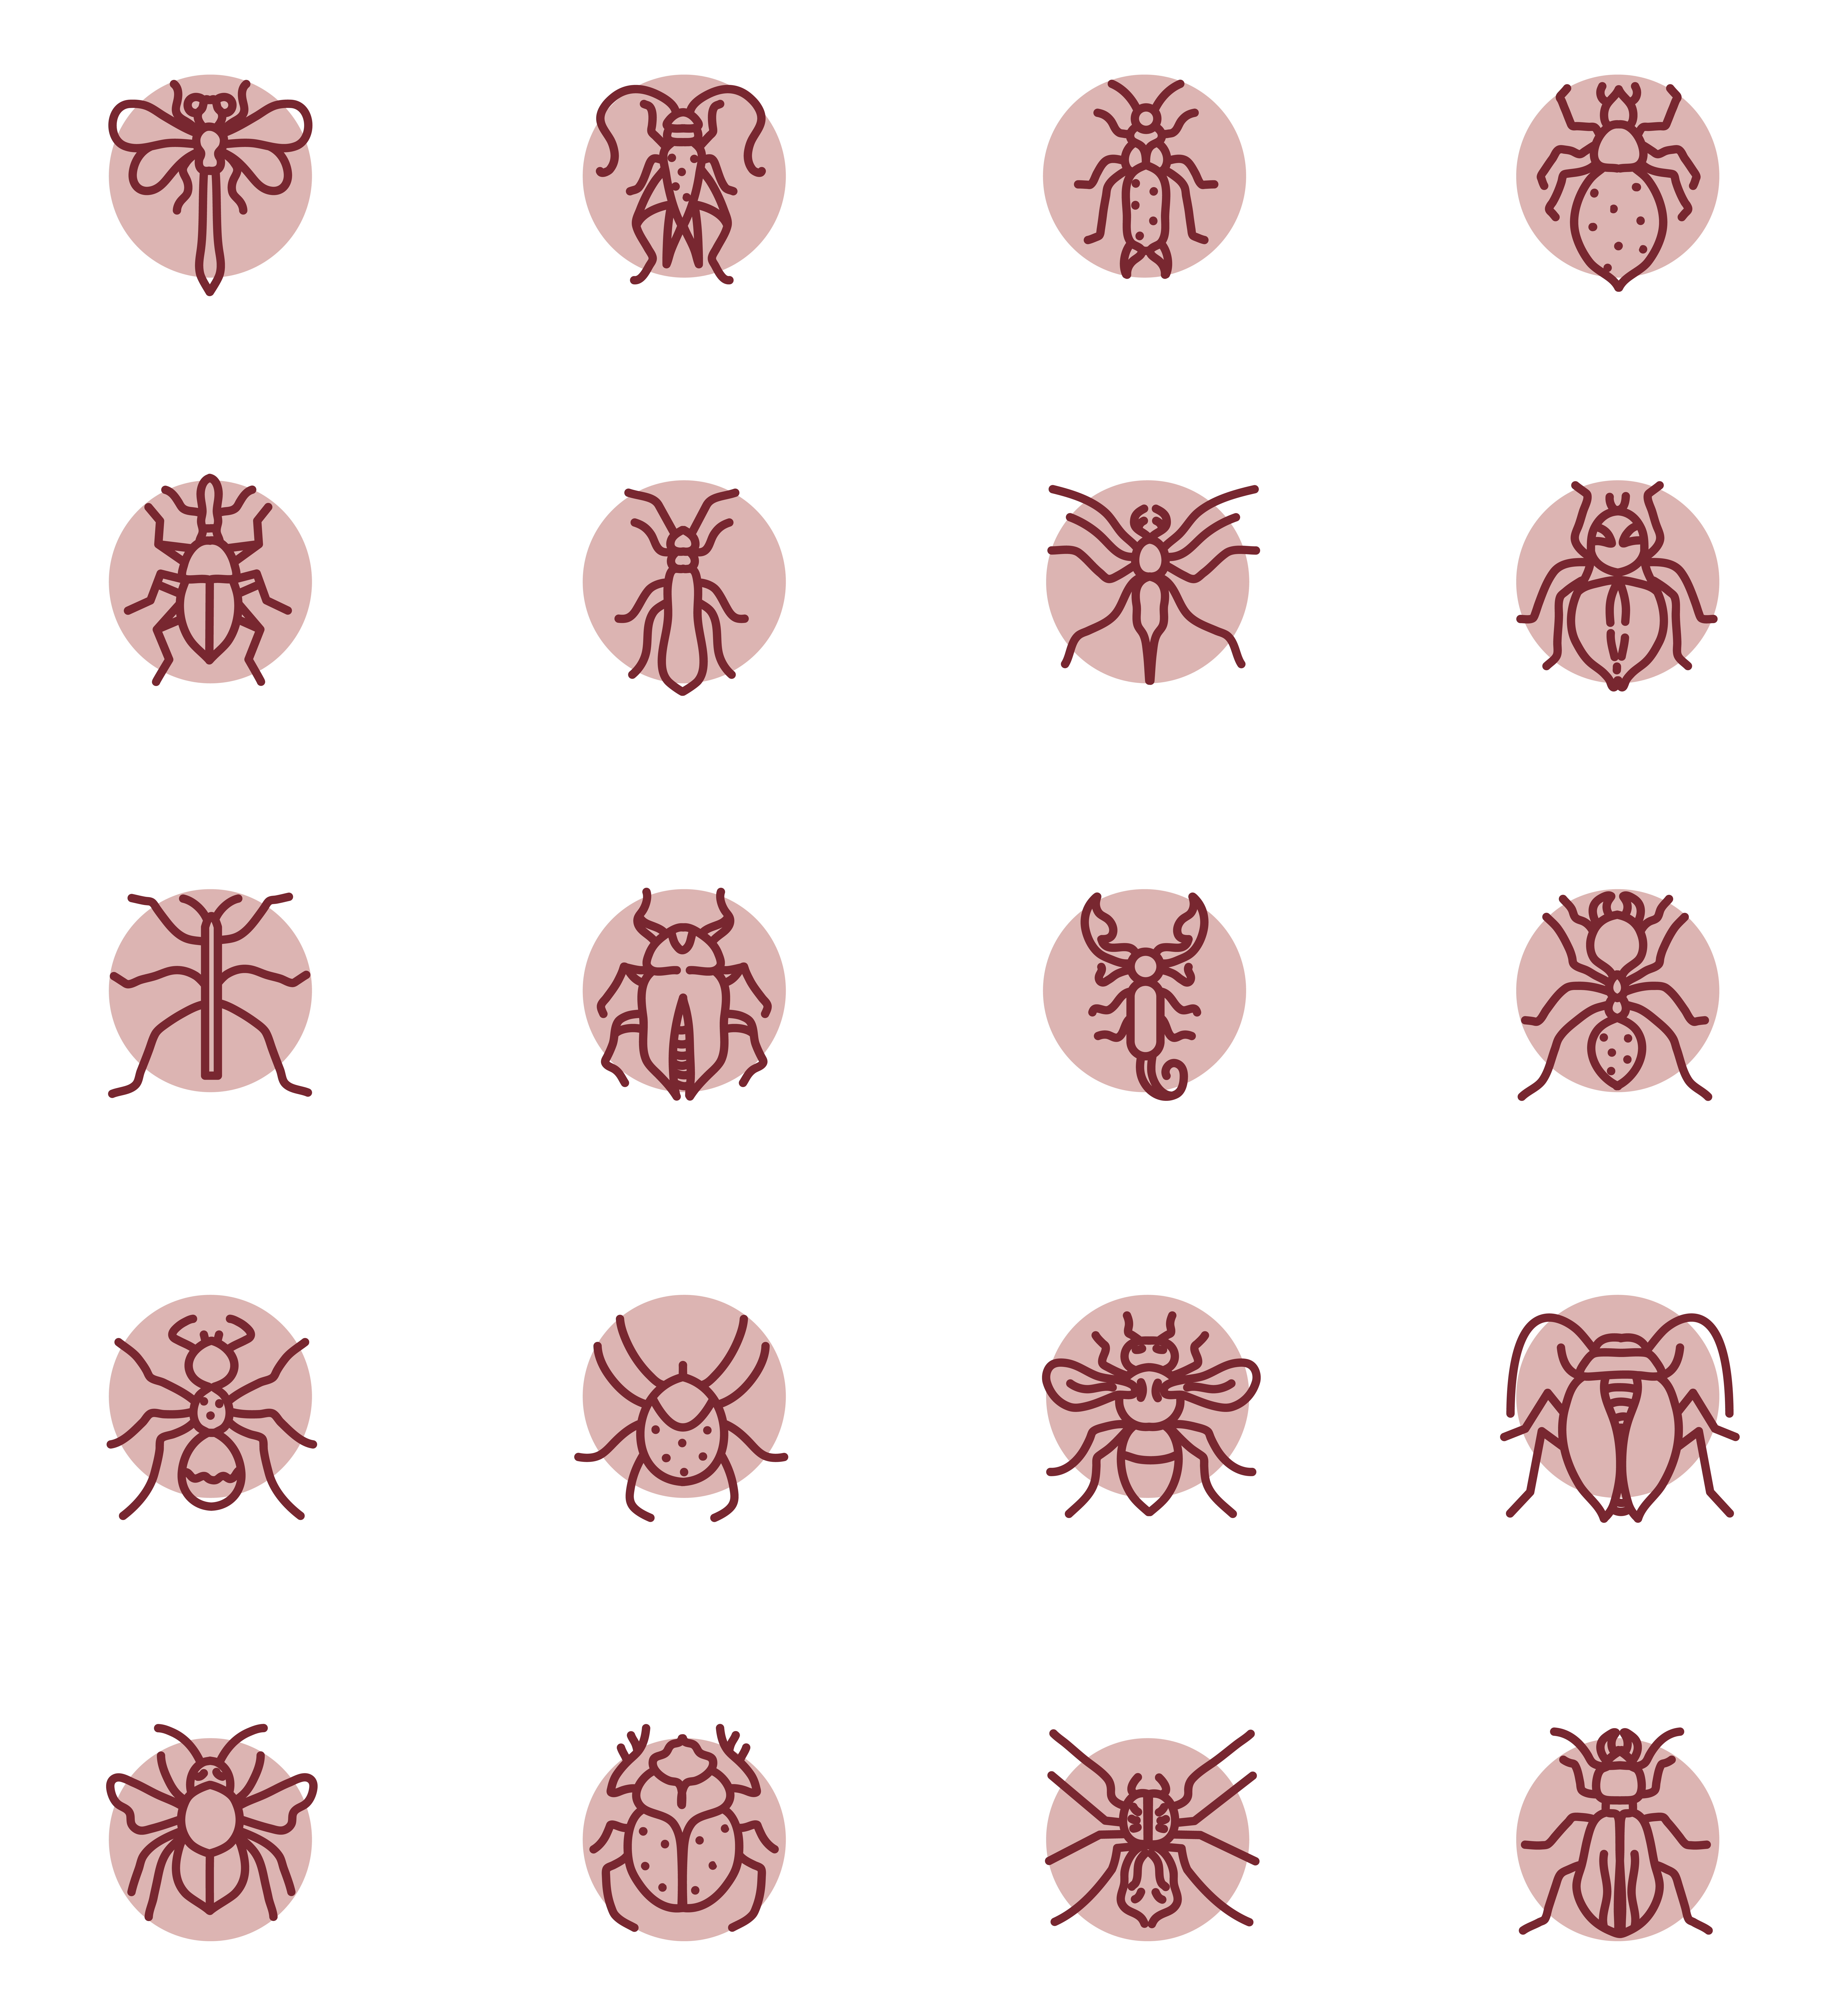 Bunch of different types of bugs on a white background.